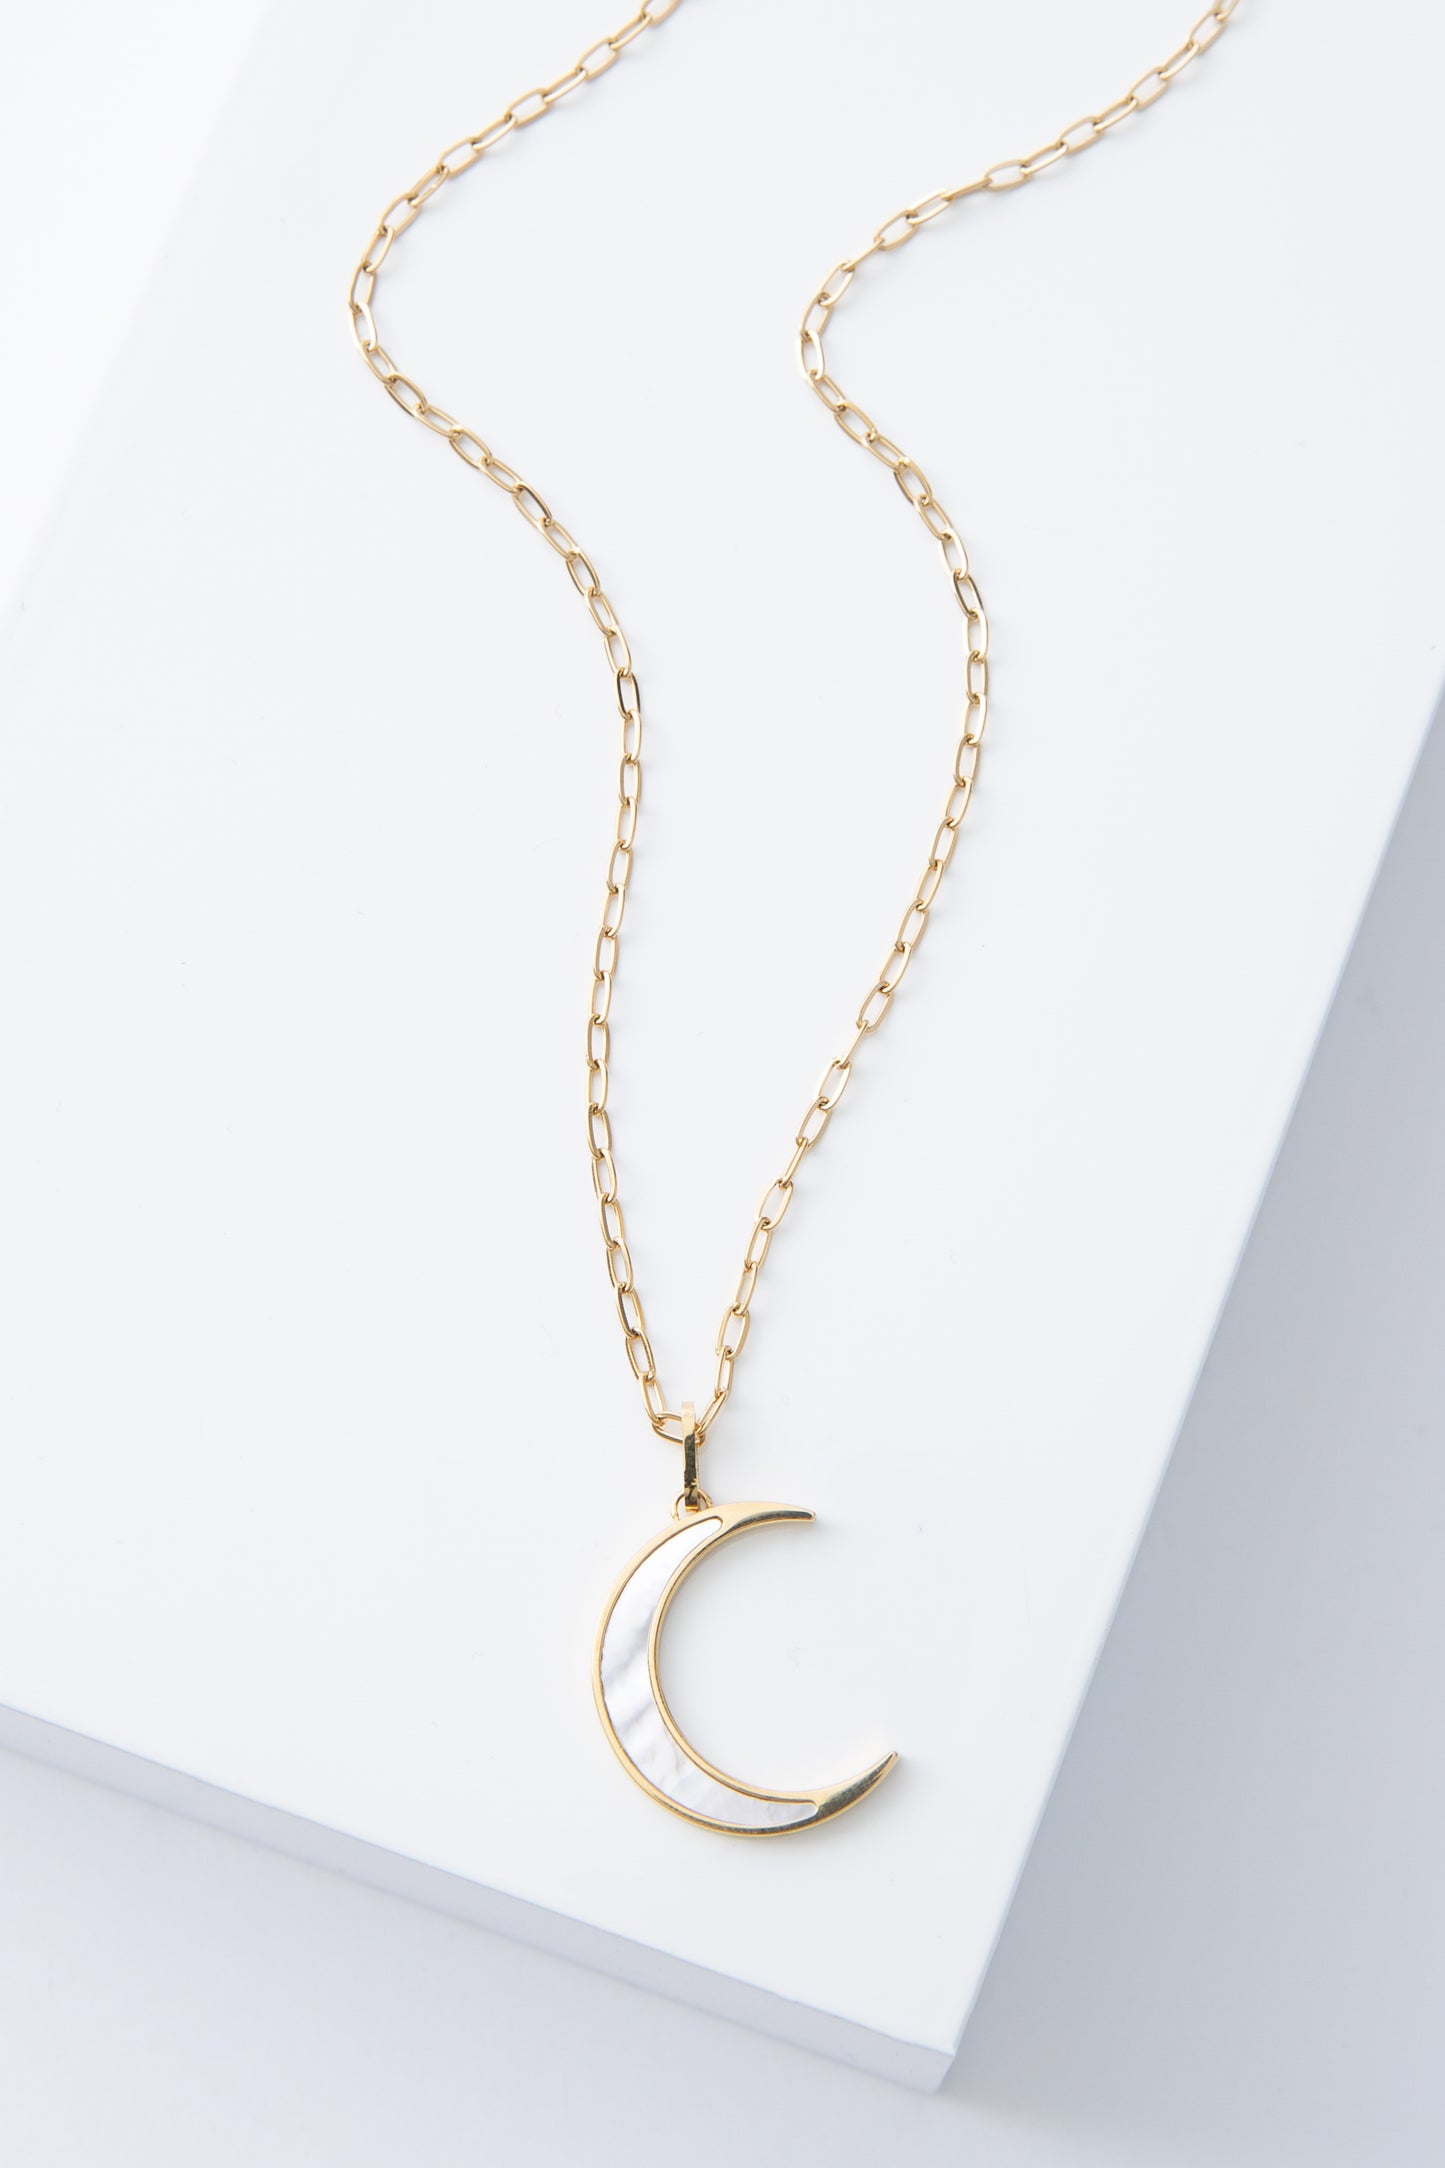 The Moonstruck Necklace is a gold chain necklace with a crescent moon shaped pendant. The pendant has a sharp, minimalist look. It is made of mother-of-pearl outlined in shining gold. 